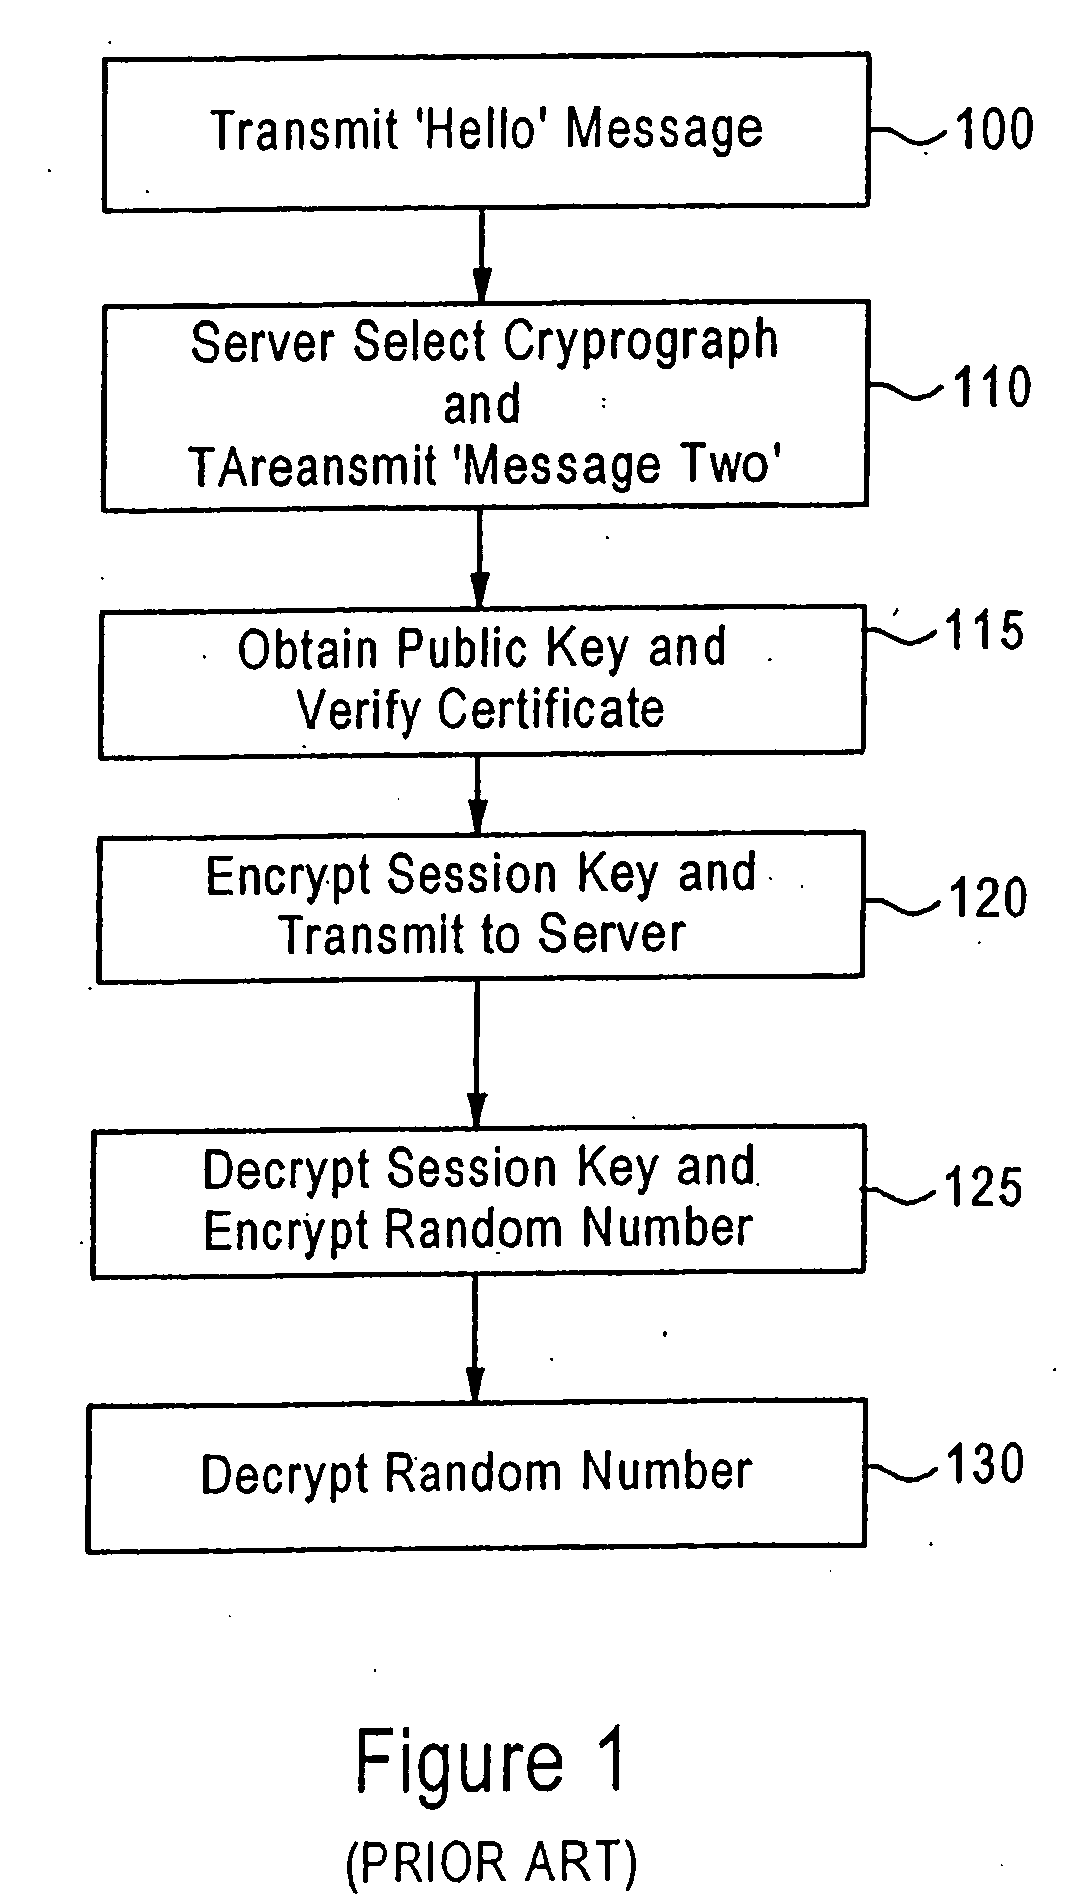 Laddered authentication security using split key asymmetric cryptography